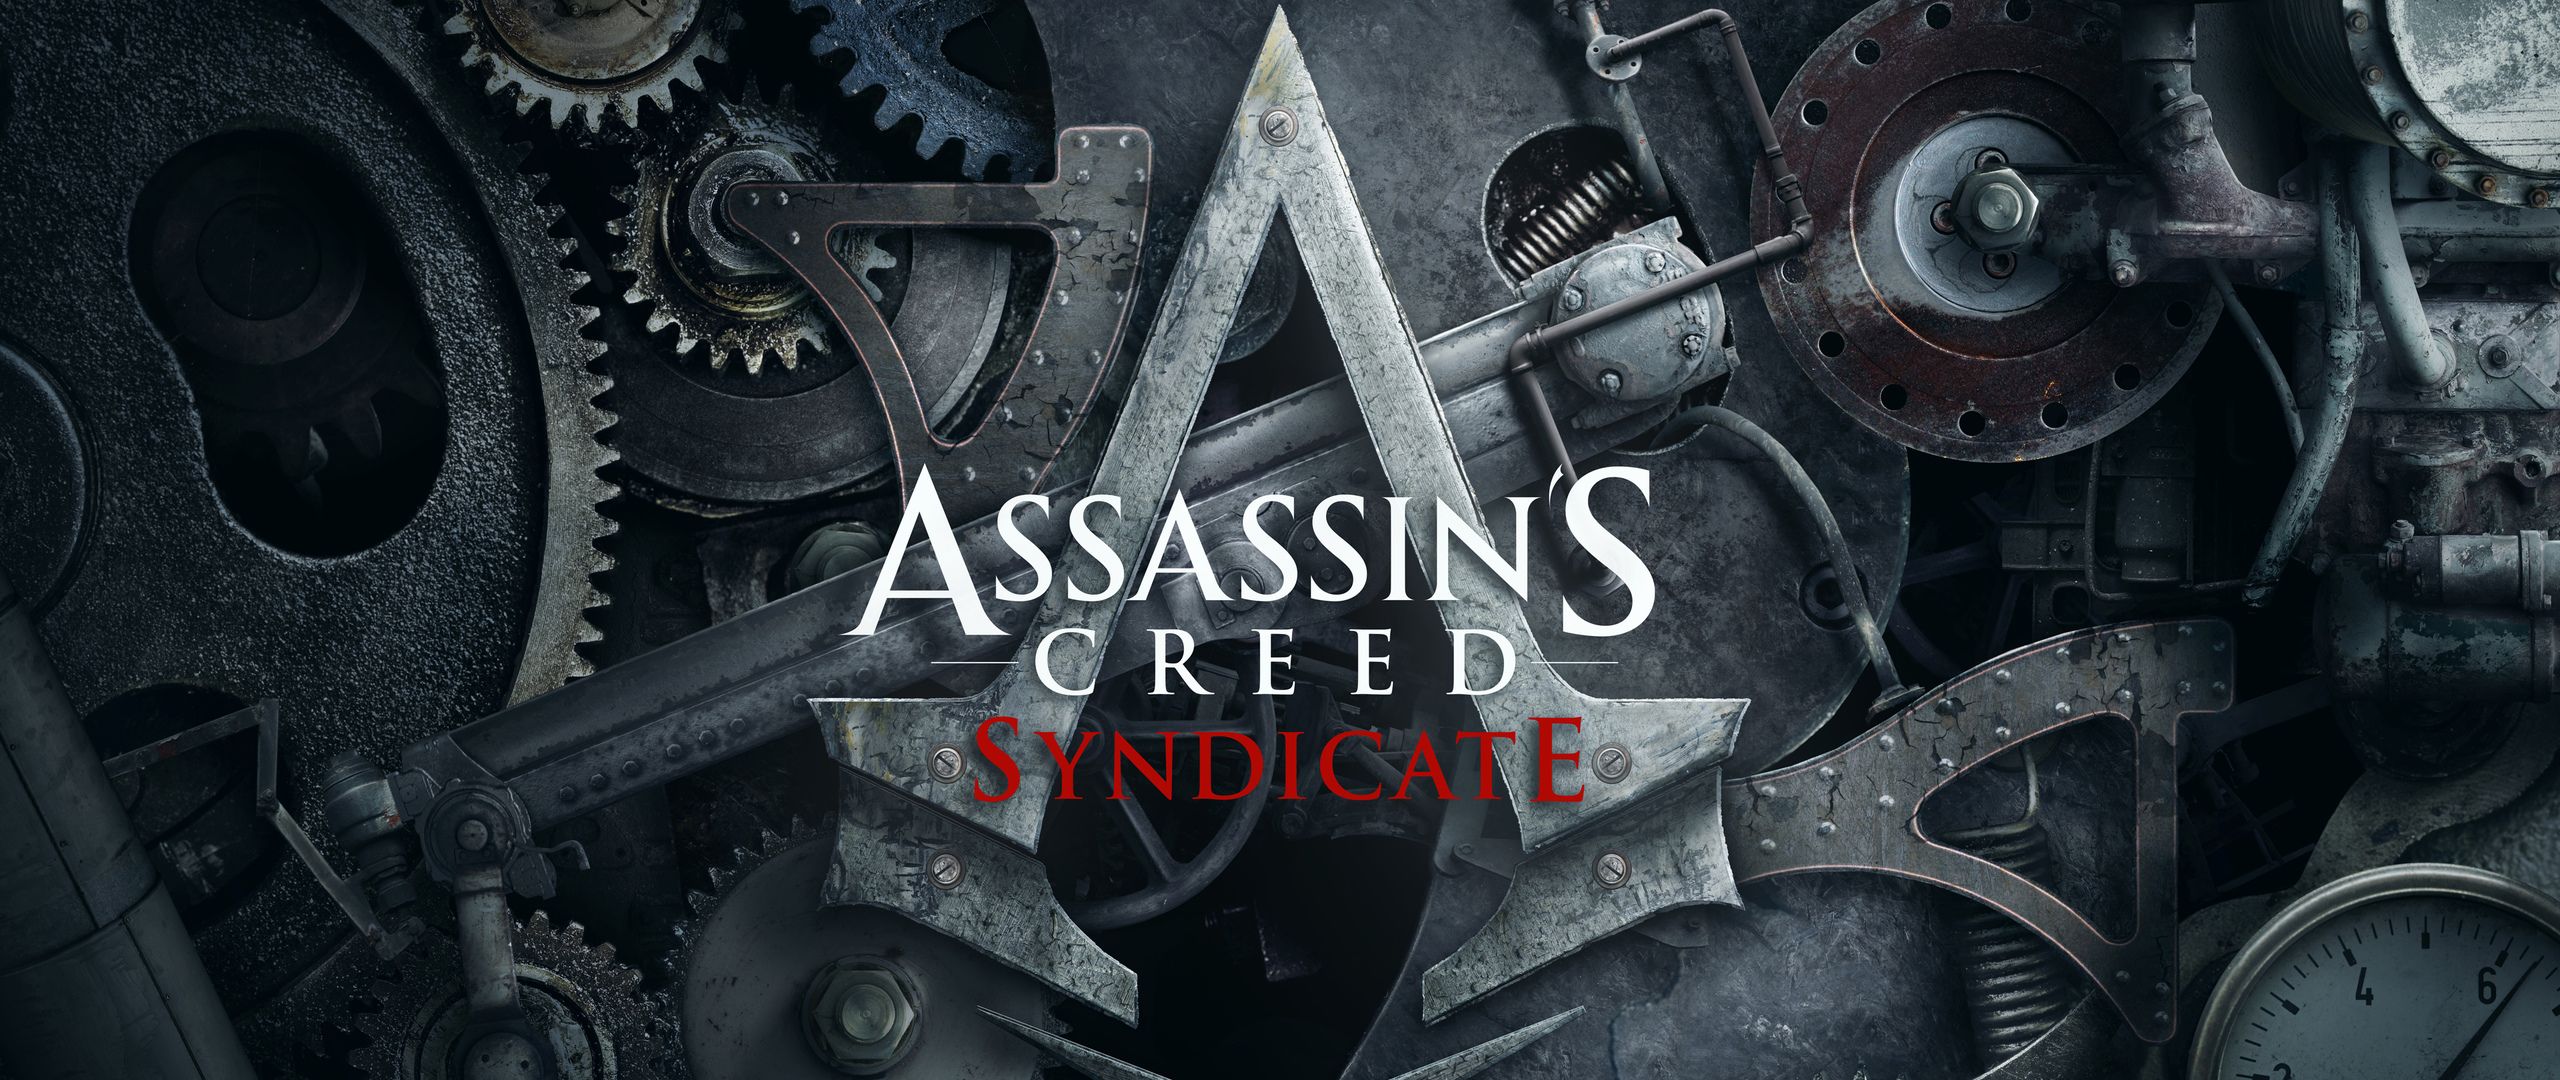 Assassin's Creed Syndicate Logo Wallpaper Free Assassin's Creed Syndicate Logo Background